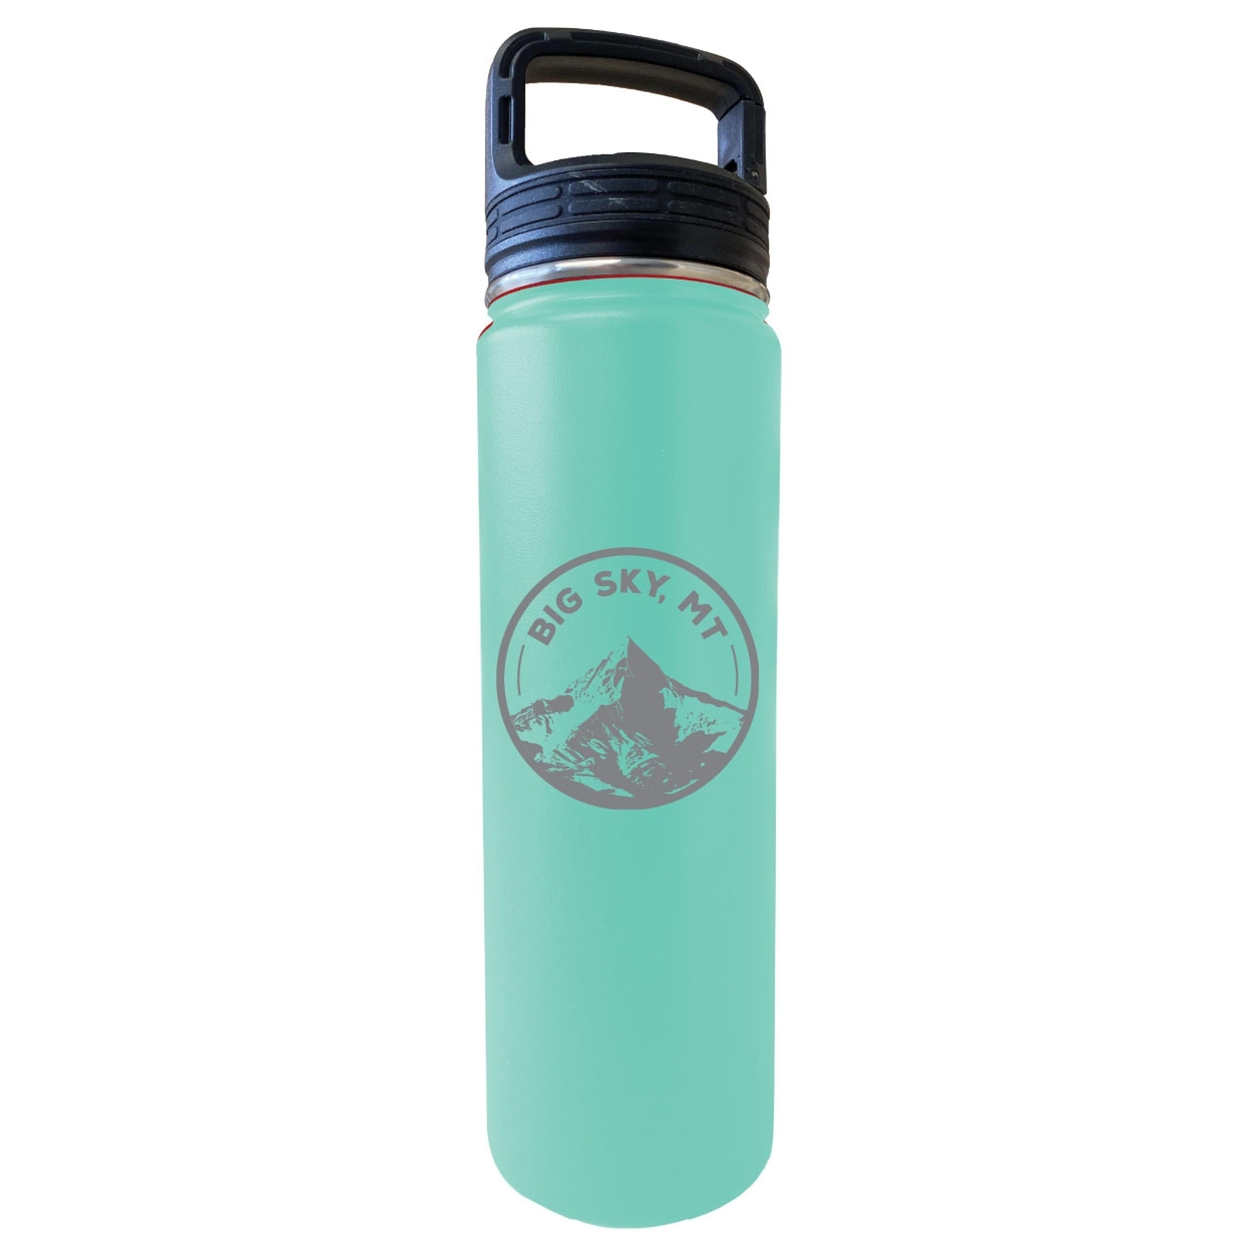 Big Sky Montana Souvenir 32 Oz Engraved Insulated Stainless Steel Tumbler - Seafoam,,2-Pack